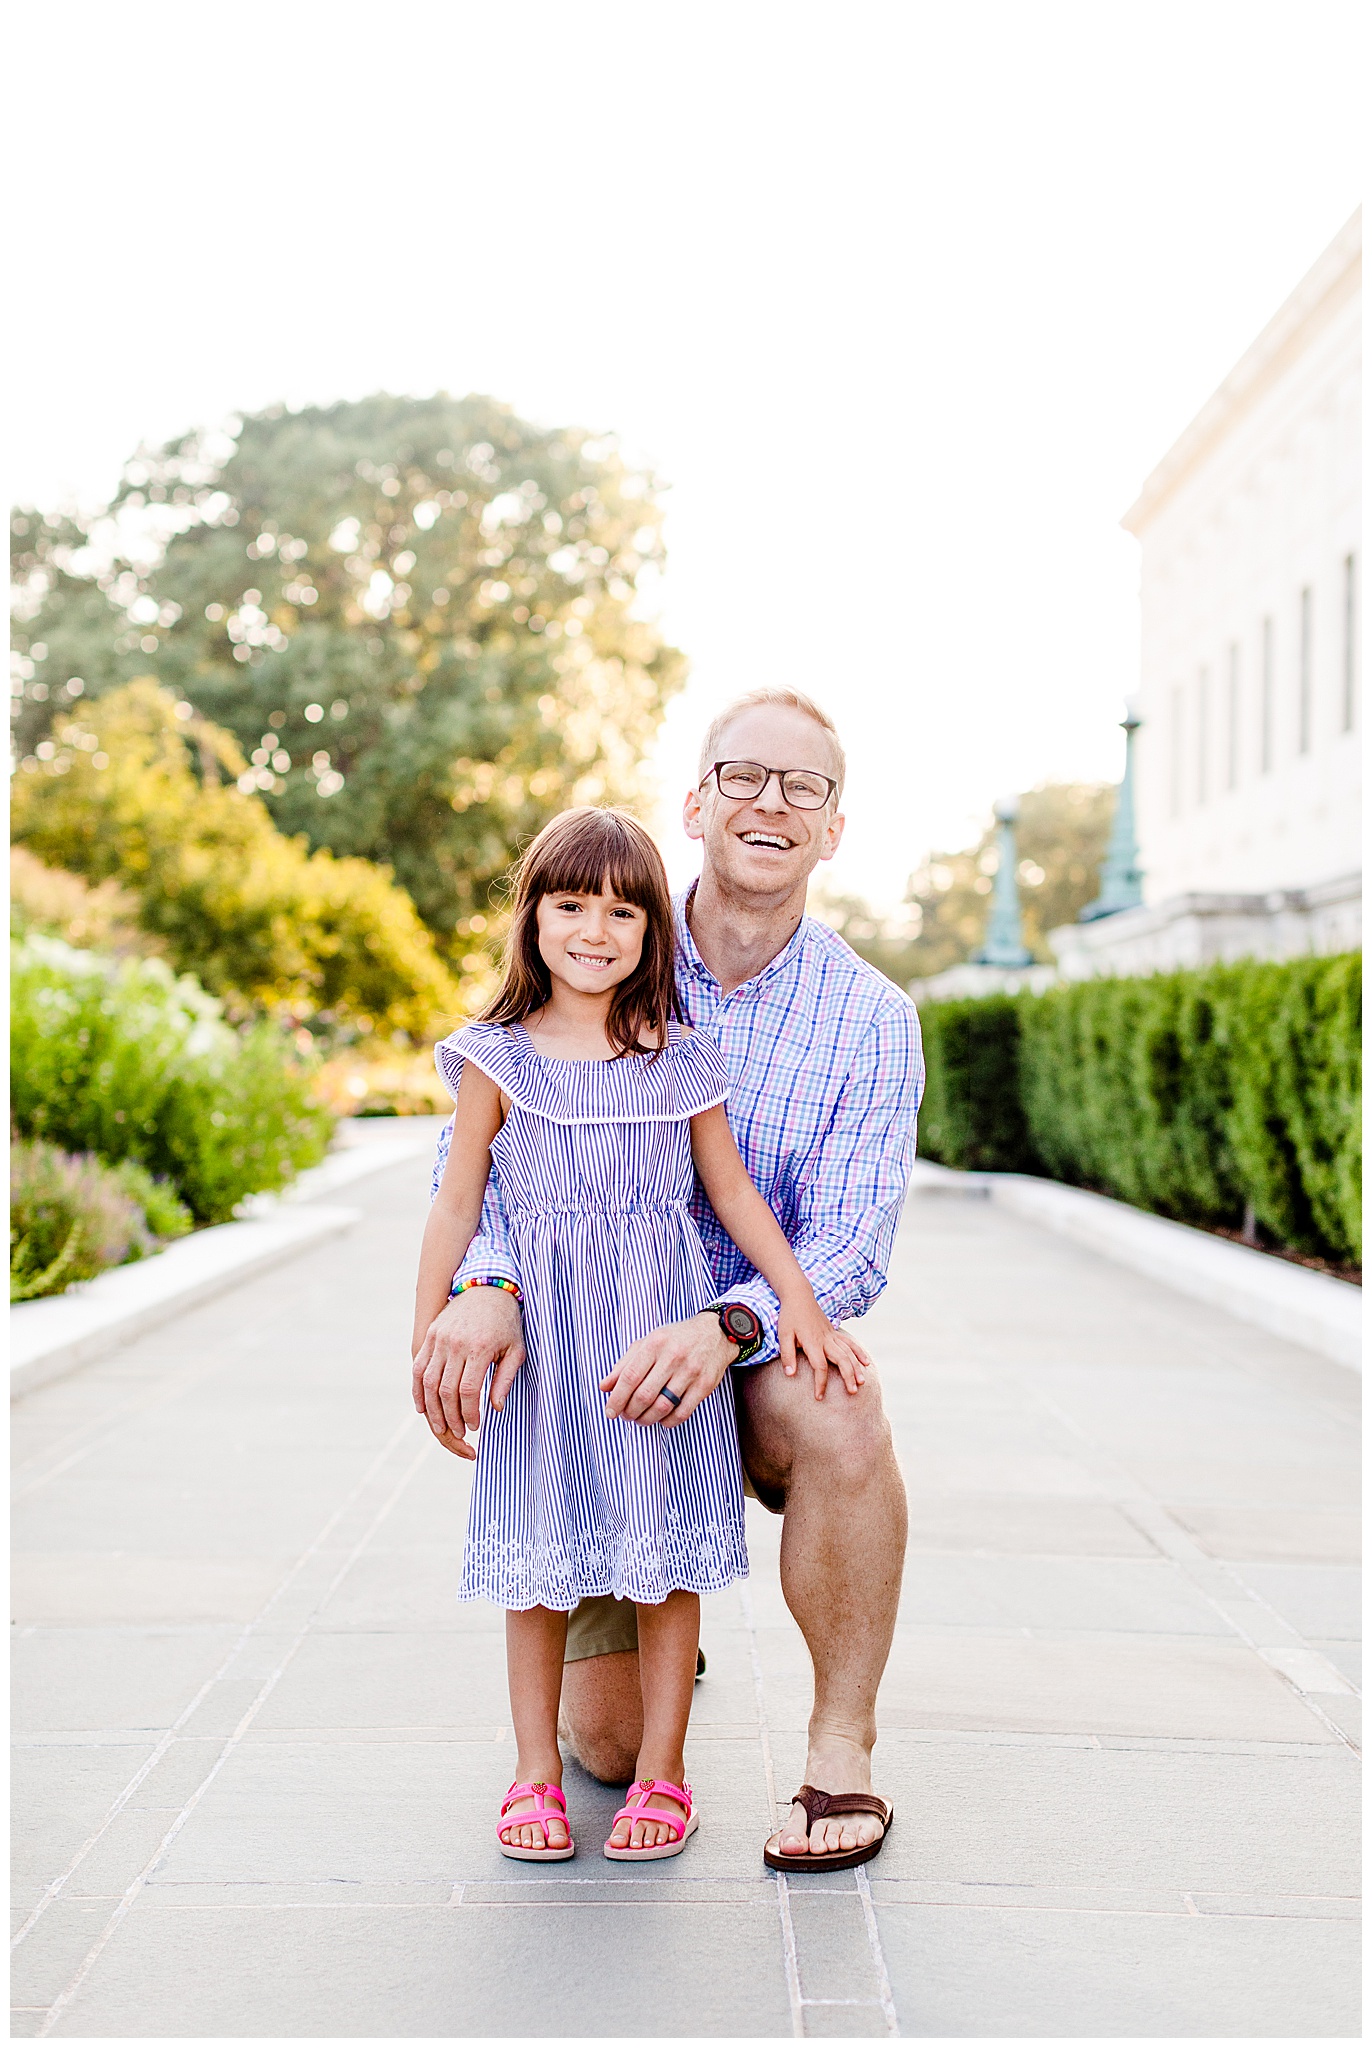 Uncle Photo Session in Washington, DC by Kofmehl Photography